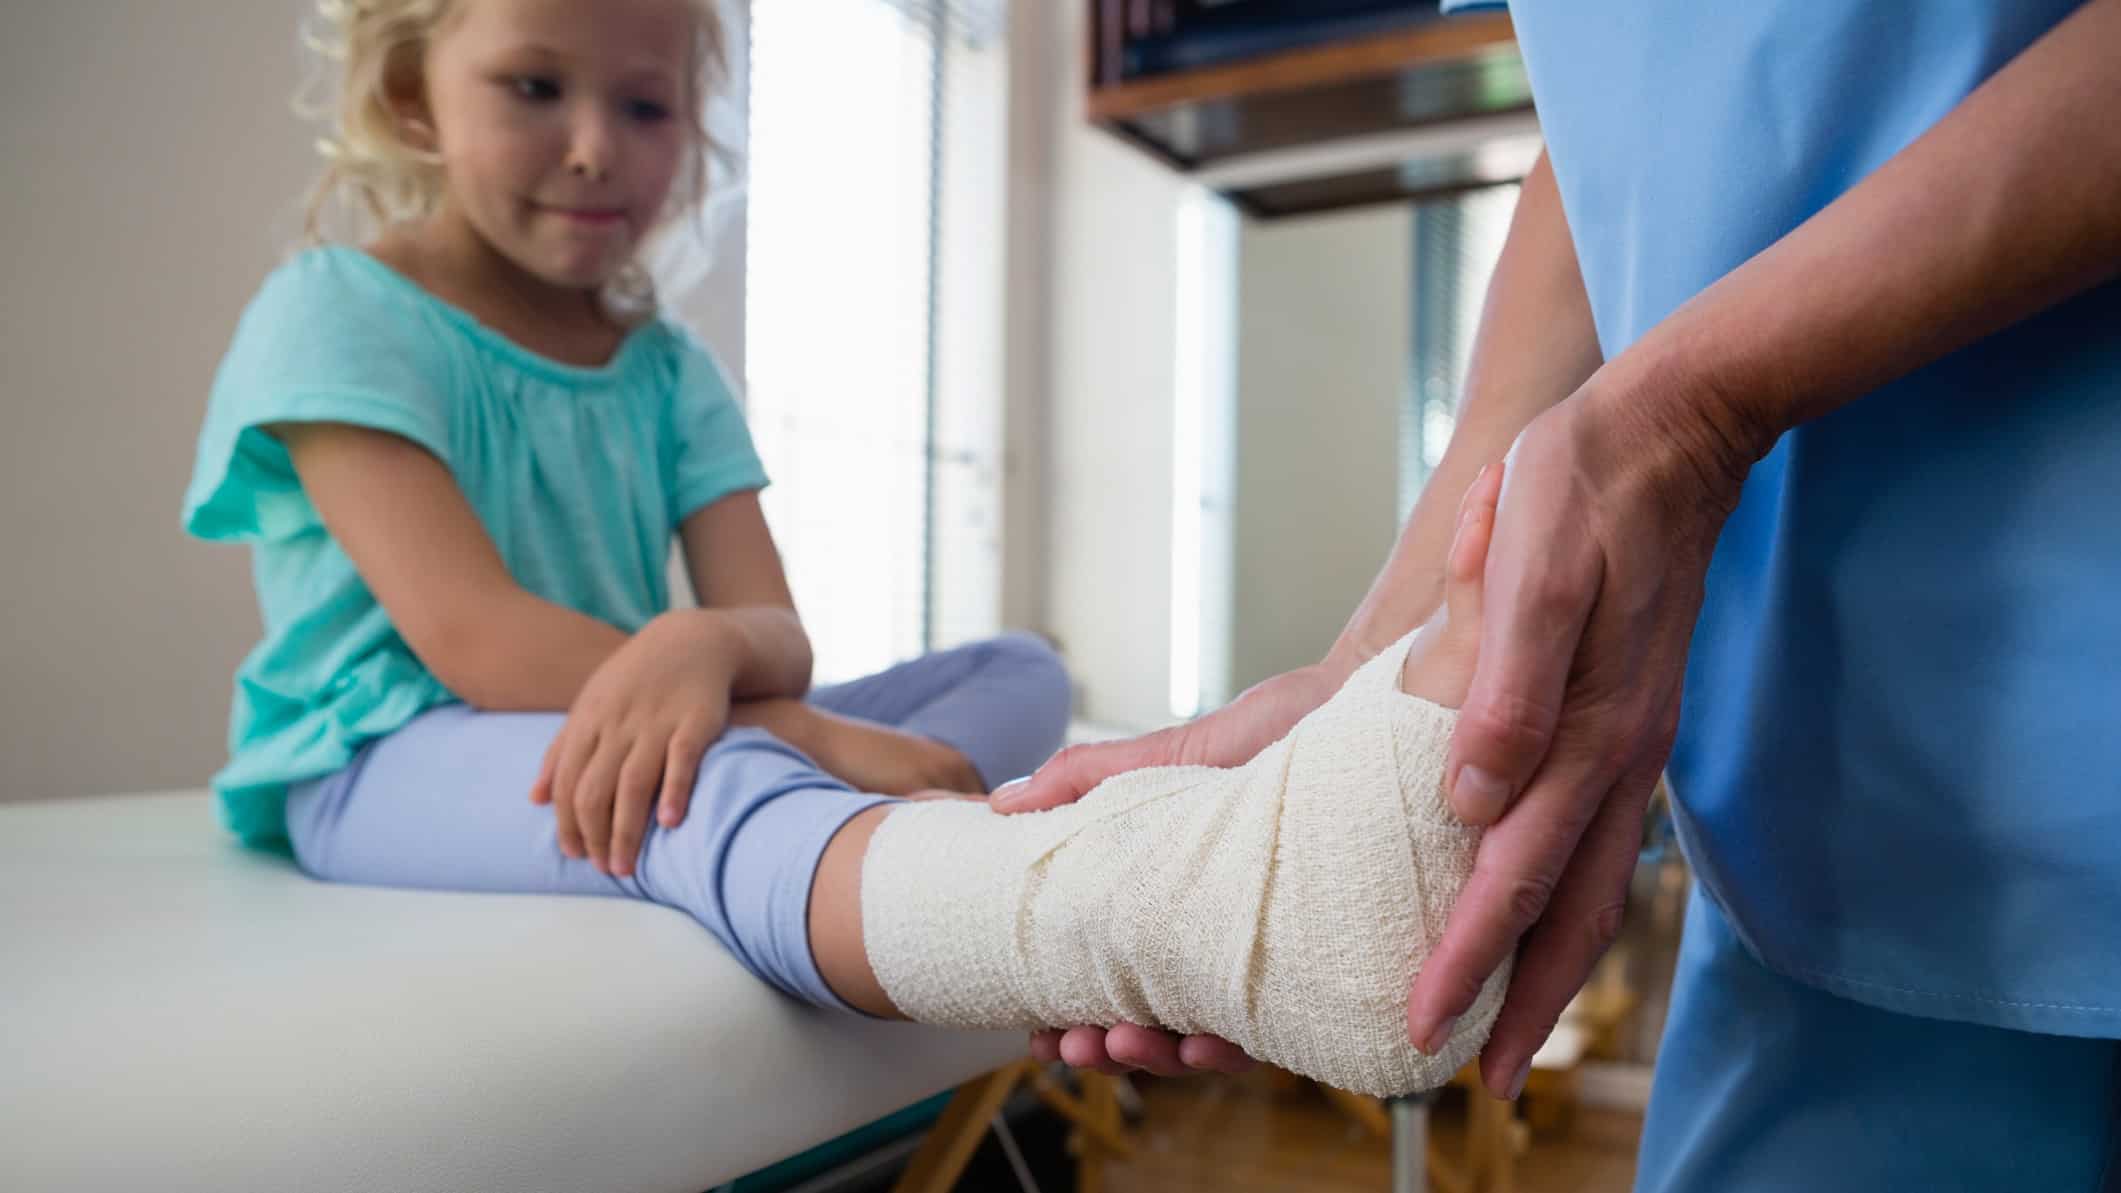 a doctor's hands take the bandaged foot and lower leg of a young girl in assessing treatment.